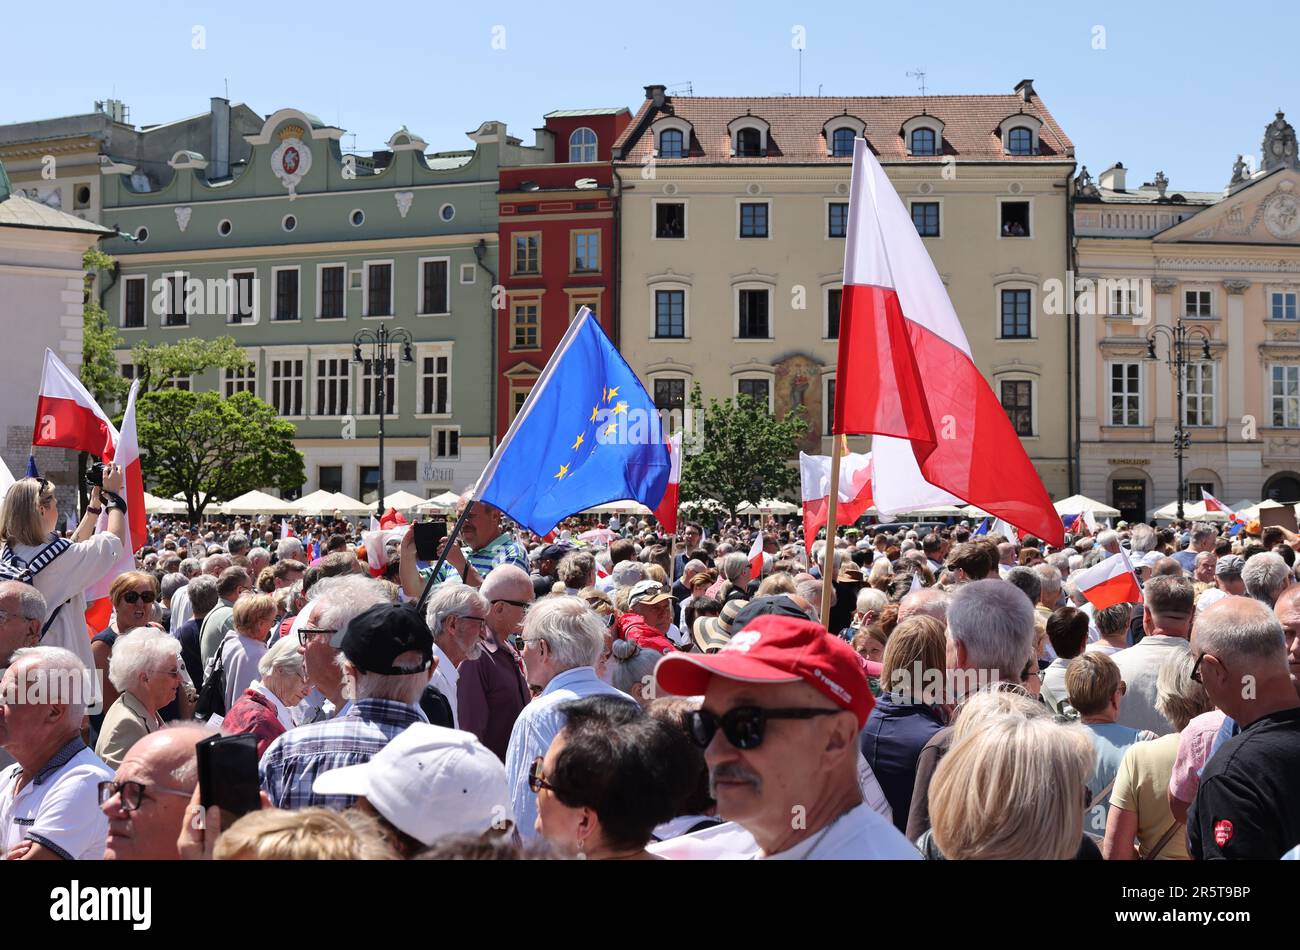 Cracow, Poland - June 4, 2023: March of freedom, march in defense of democracy, Krakow supports the great march in Warsaw. Stock Photo